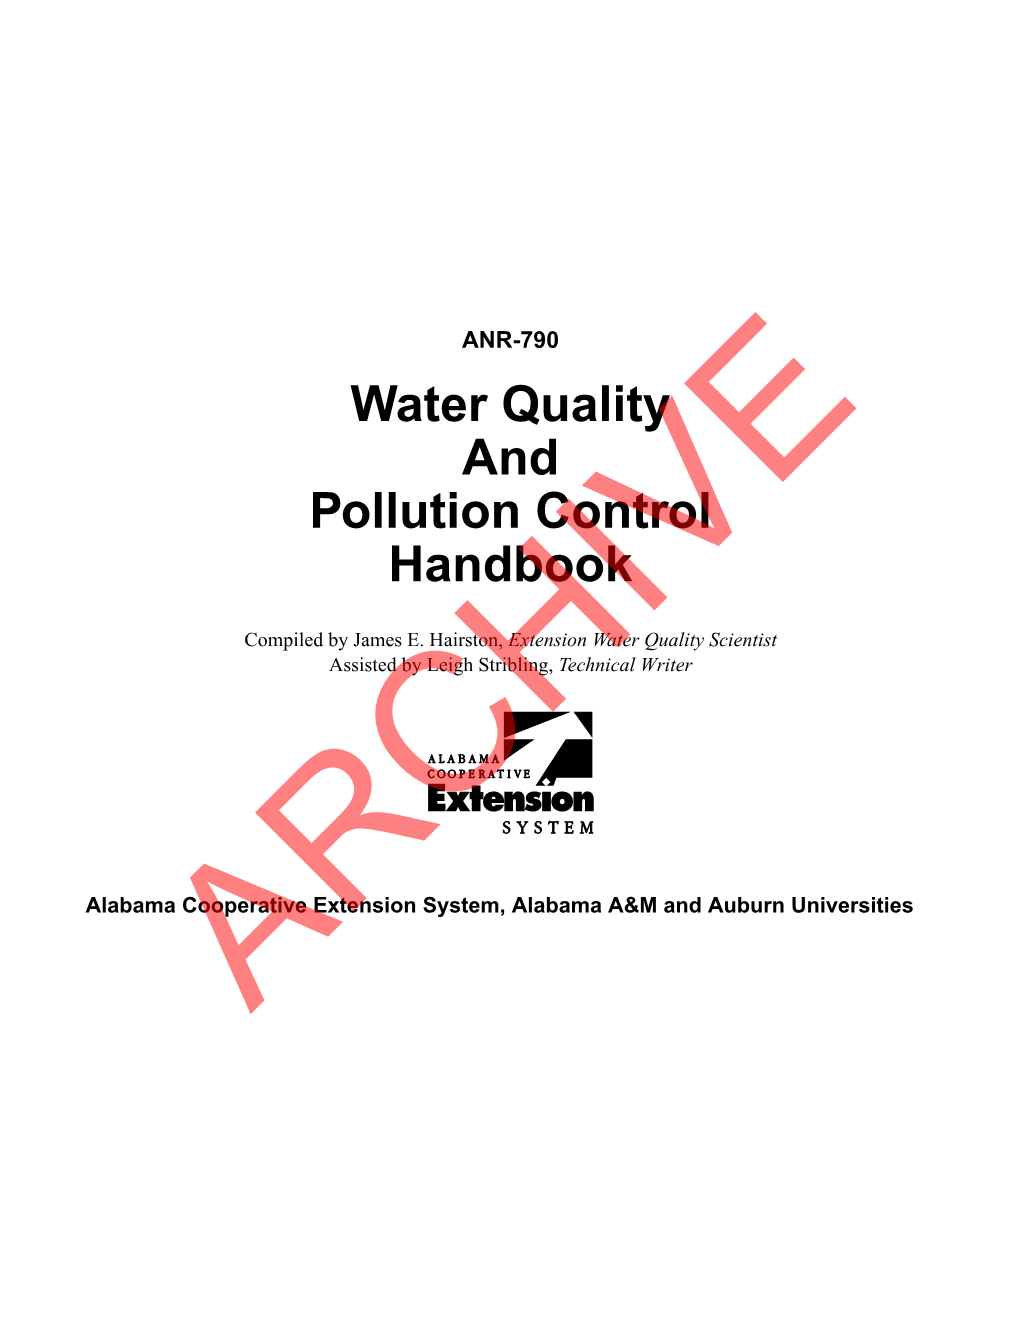 Water Quality and Pollution Control Handbook